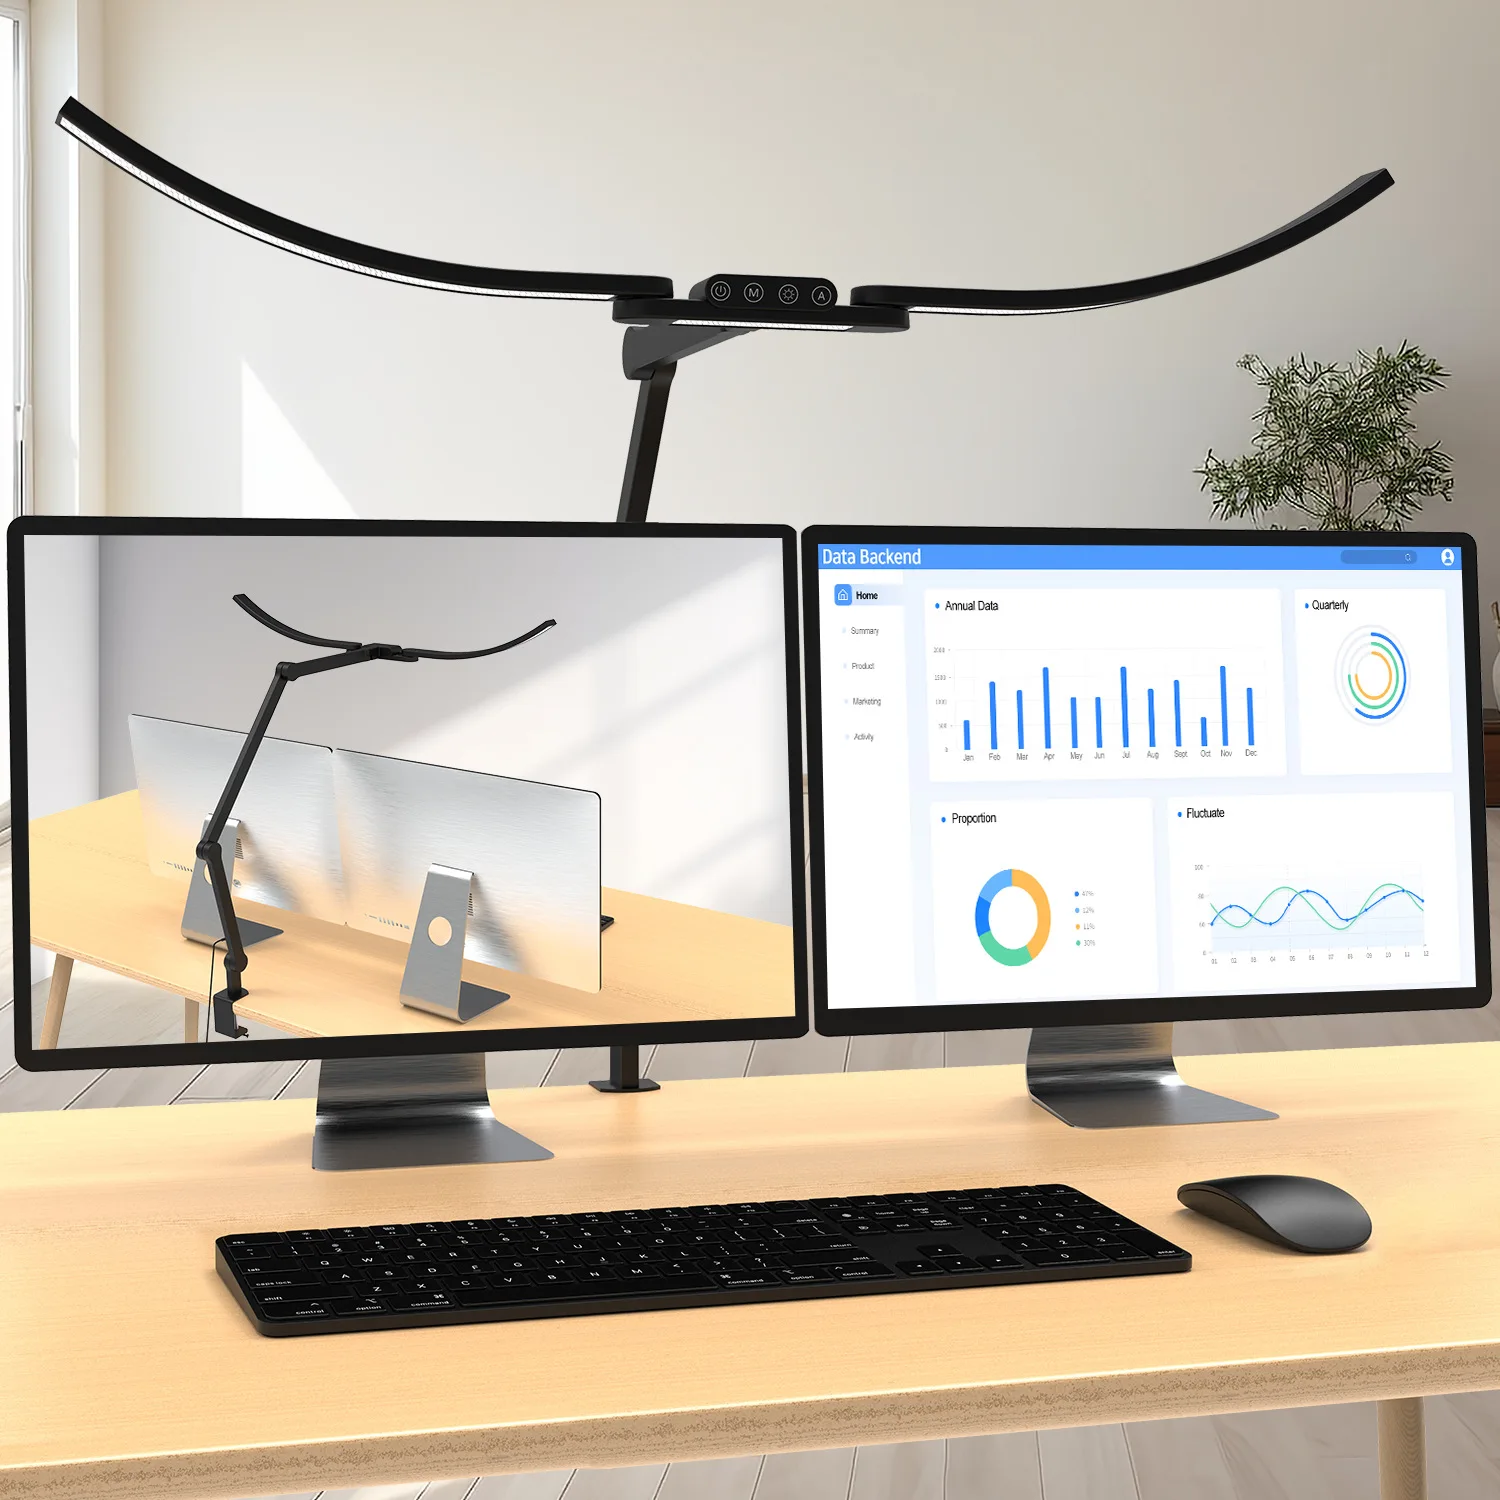 

Led Desk Lamp for Home Office Ultra Bright Touch-Dimming Architect Table Lamp with Clamp 24W Adjustable Foldable Led Desk Light